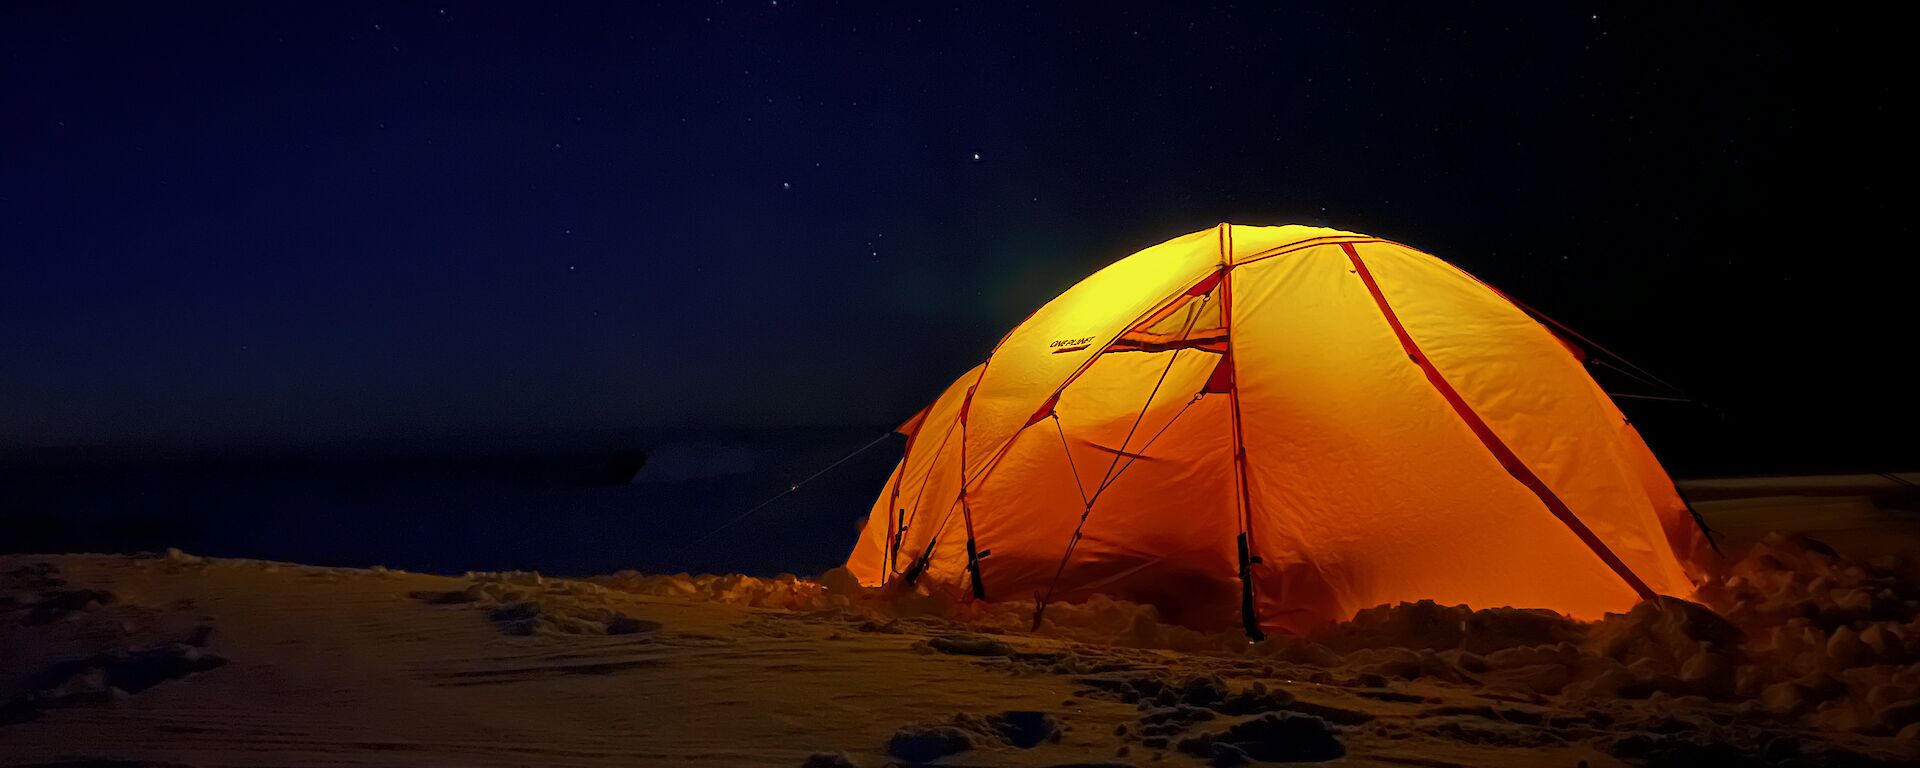 It is night time, and a yellow dome shaped tent sits on the snow covered ground. There is a light inside the tent, illuminating it. The sky is a very dark blue, almost black, and filled with stars.